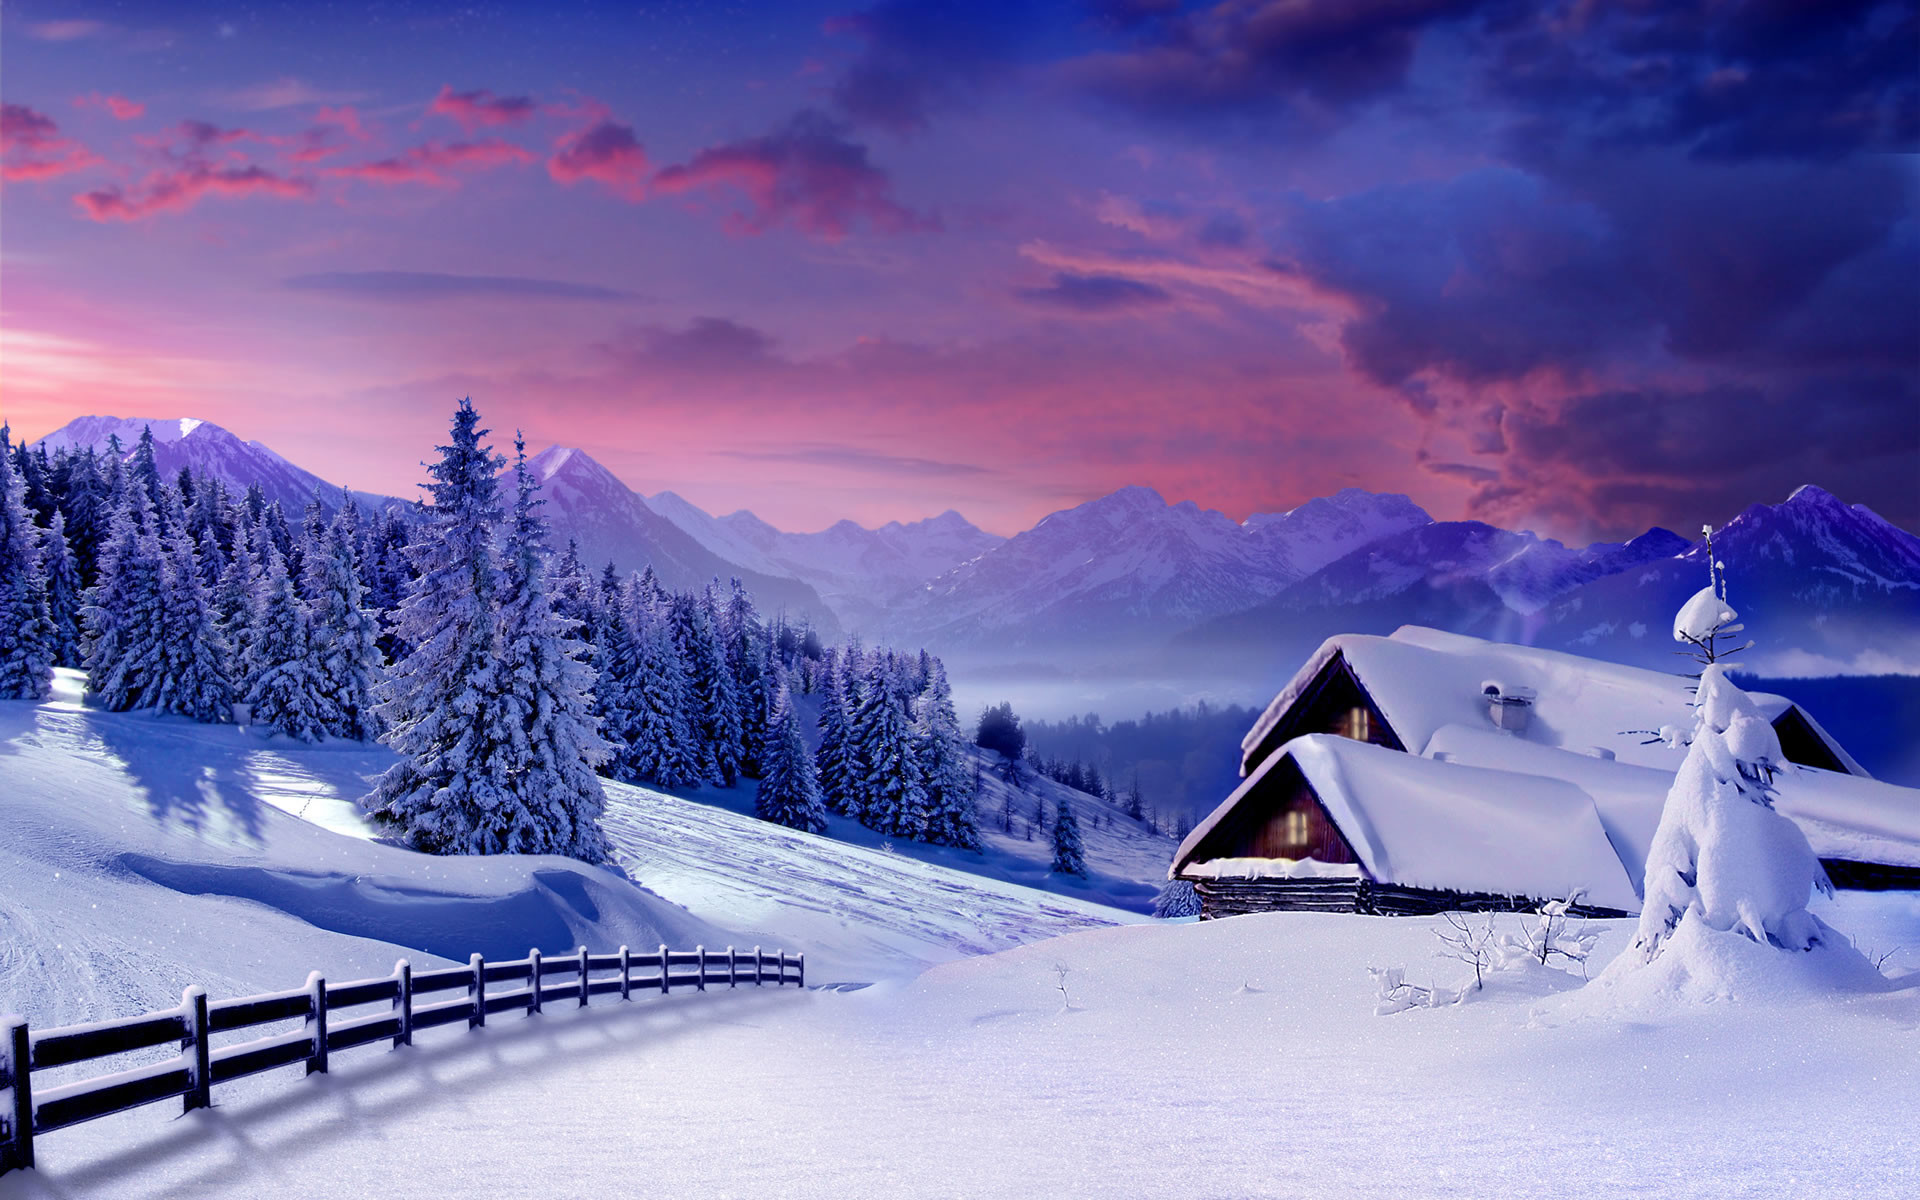 1920x1200 free hd winter pictures full hd download high definiton wallpapers desktop  images windows 10 backgrounds download wallpapers quality images computer  ...